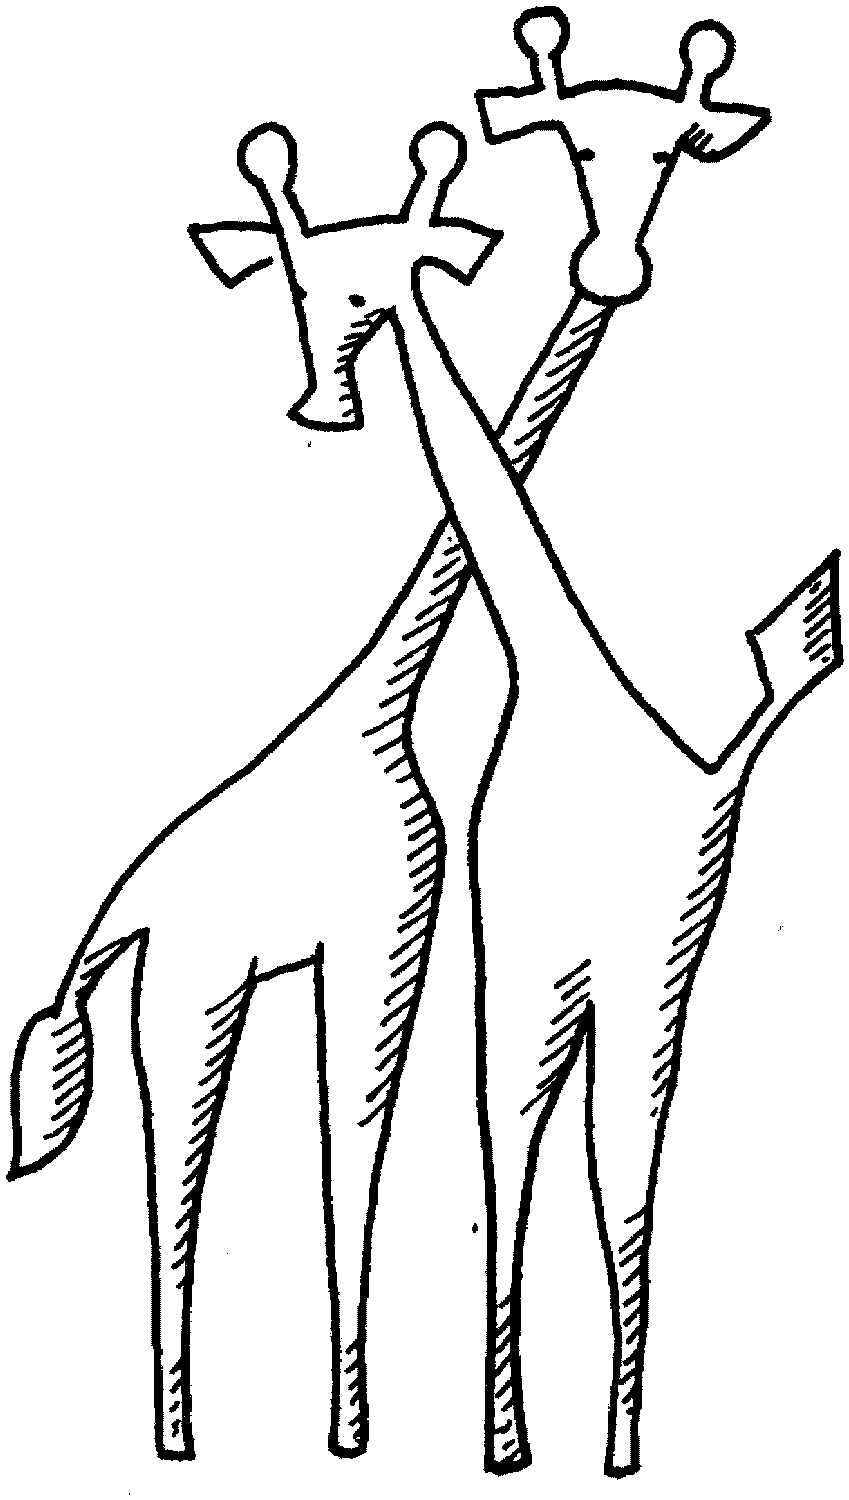 Two Etnhics Giraffes Animal Coloring Pagesa06f Coloring Page